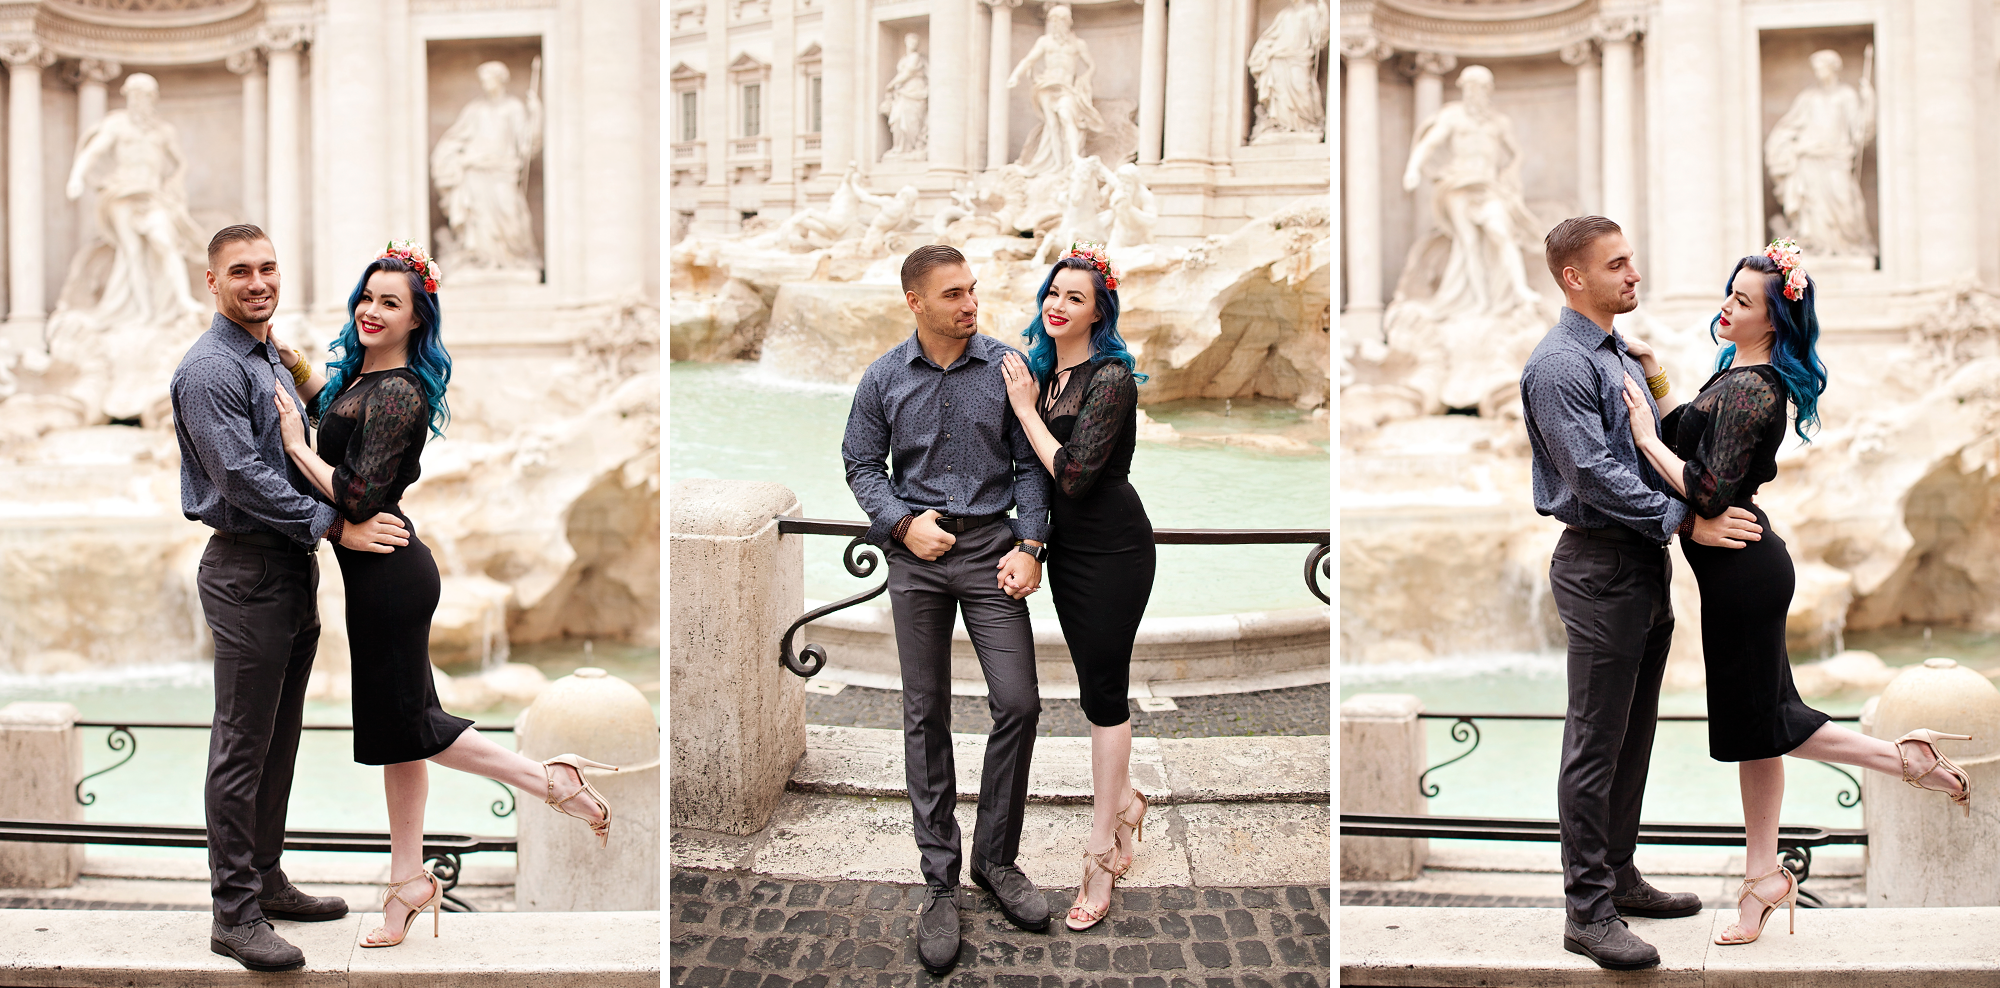 Honeymoon, vacation, family, engagement, maternity, wedding, love story individual and solo photoshoots in Rome, Italy by photographer Tricia Anne Photography | Rome Photographer, vacation, tripadvisor, instagram, fun, married, bride, groom, love story, photography session rome, photoshoot rome, wedding photographer, vacation photographer, Rome engagement photo shoot, rome honeymoon, rome wedding, elopement in Rome, honeymoon photographer rome, engagement photo shoot, English speaking photographer in Rome